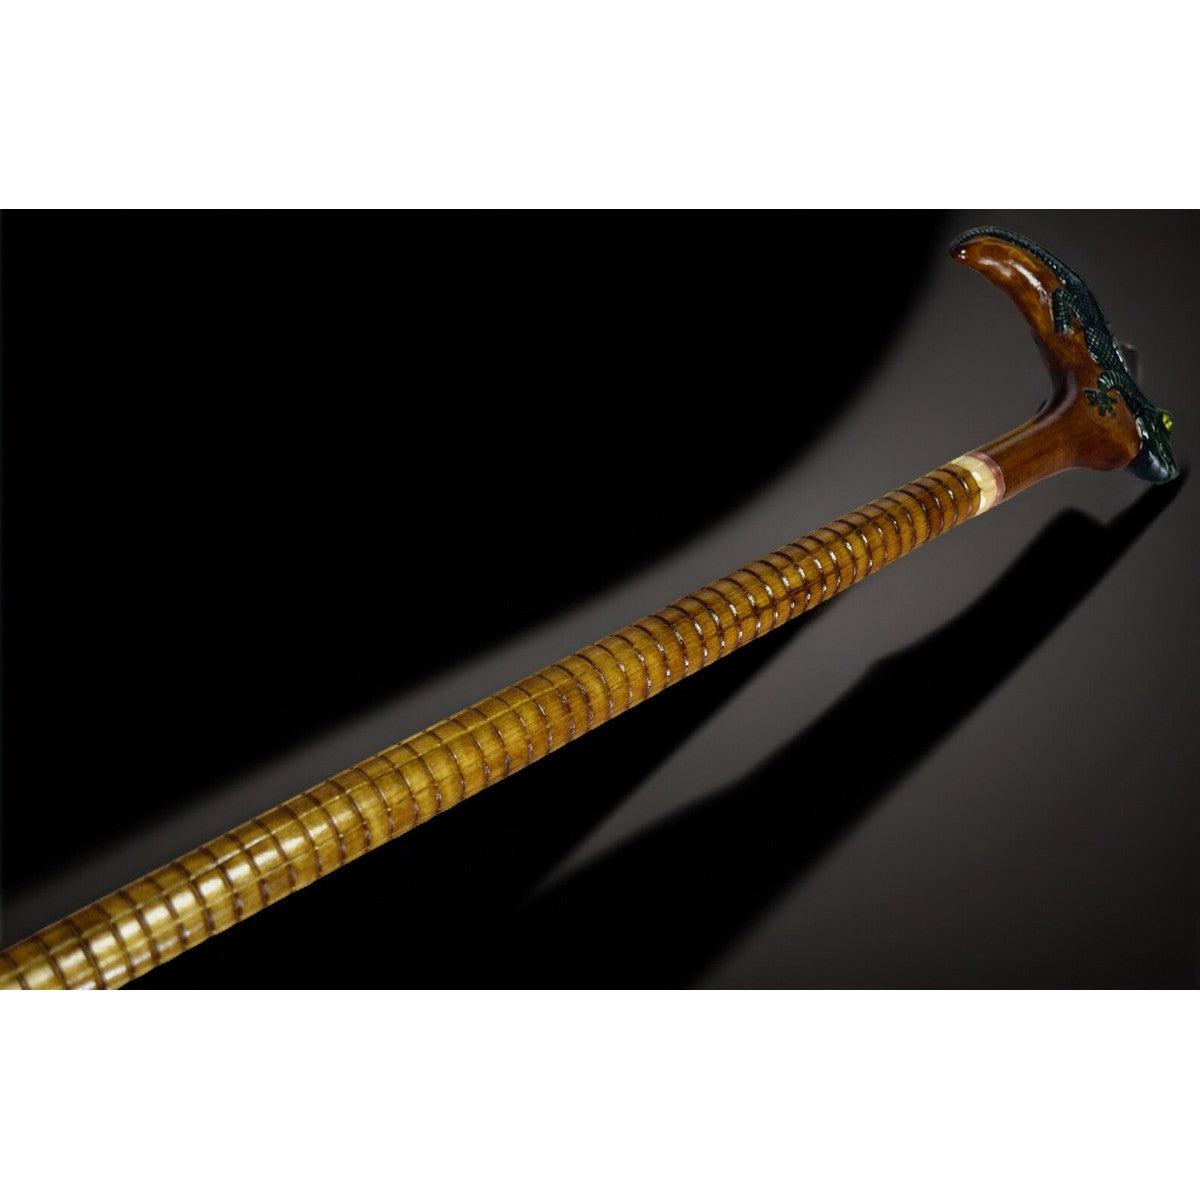 Bayou Majesty: Hand-Painted Alligator Carved Wooden Cane